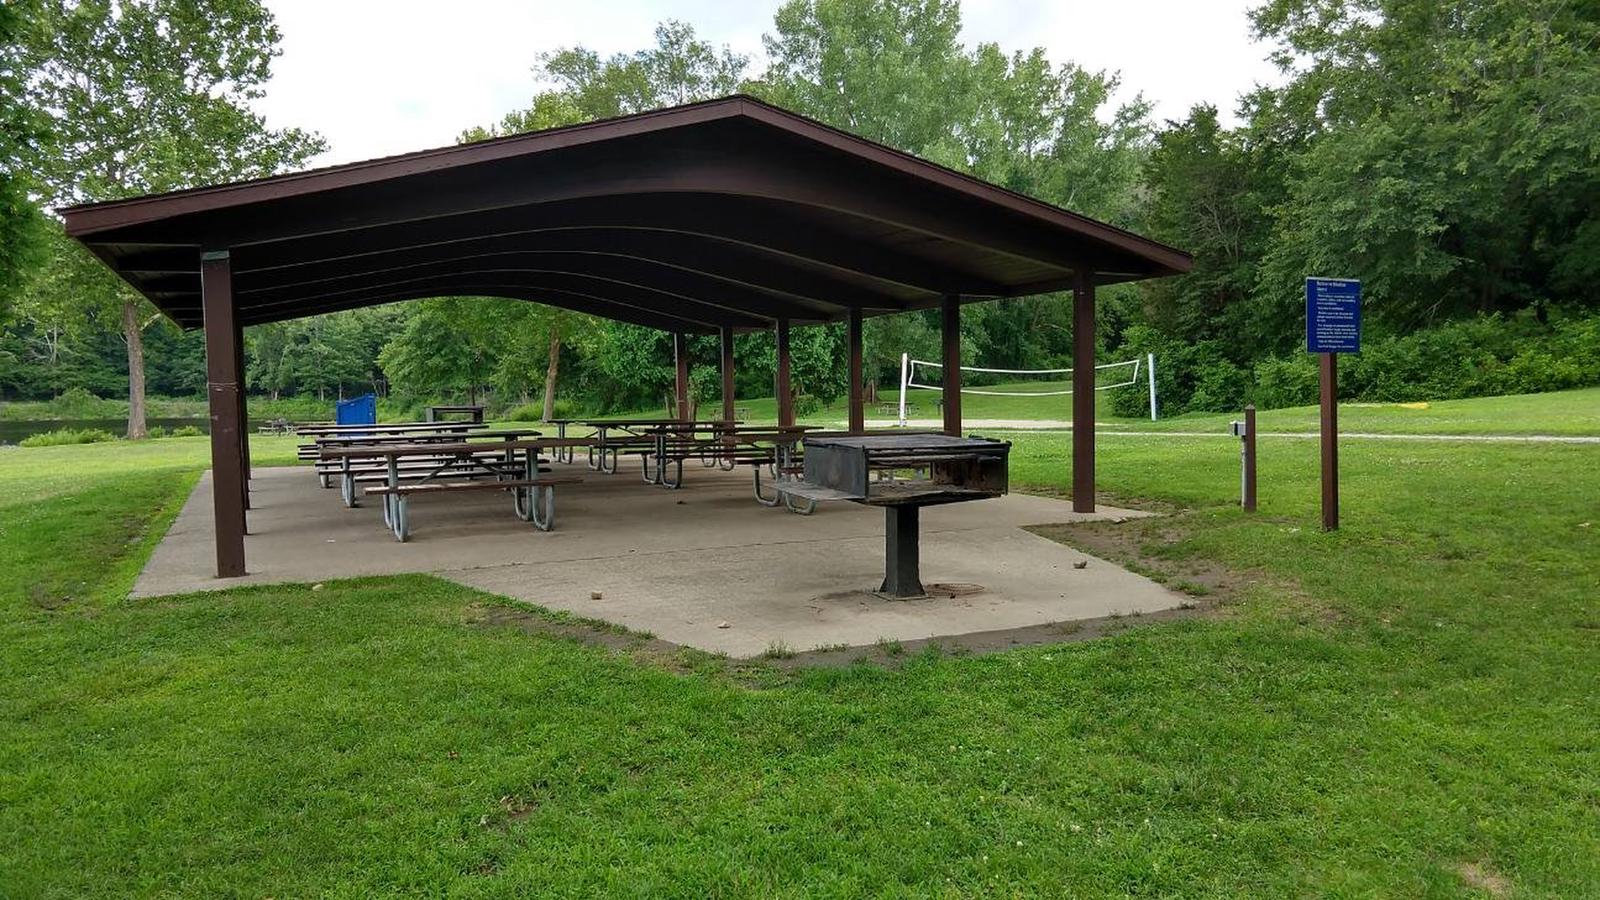 WEST LAWN SHELTER